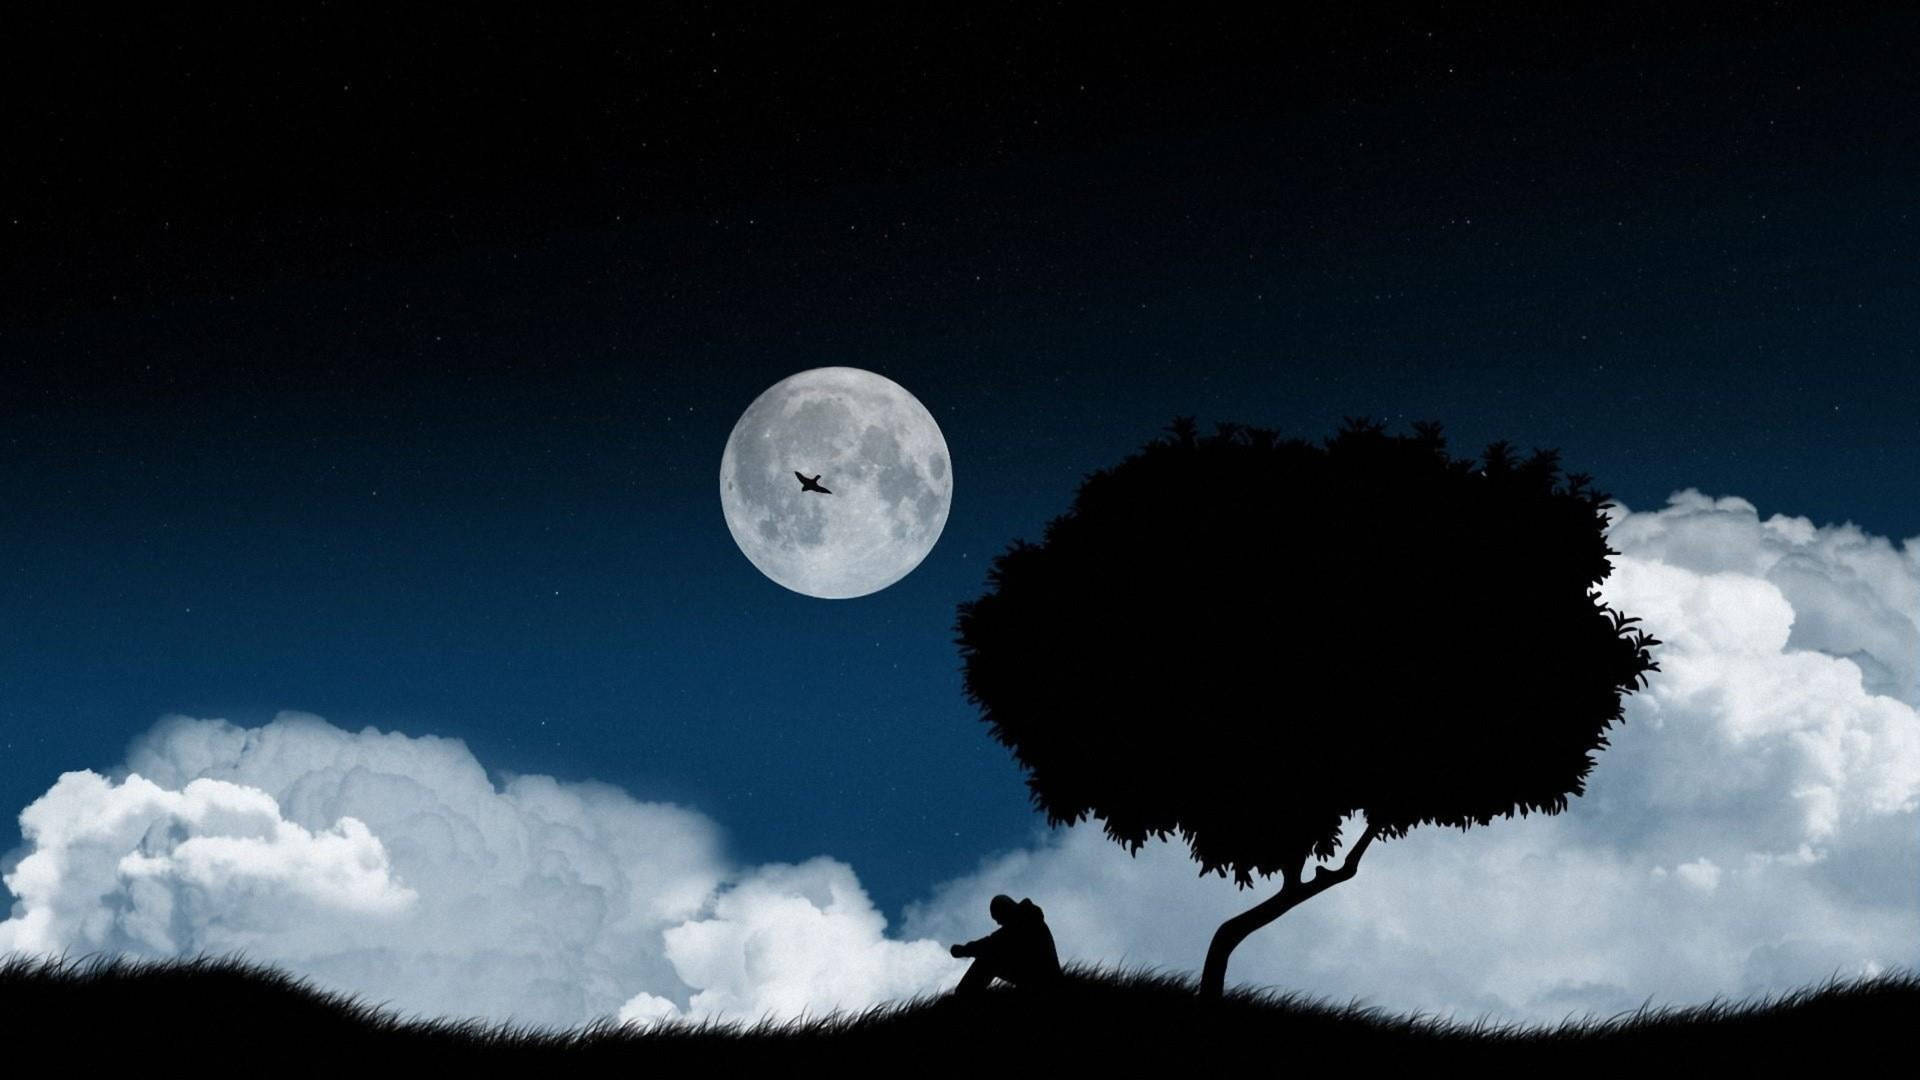 Feeling Alone By Tree And Moon Wallpaper